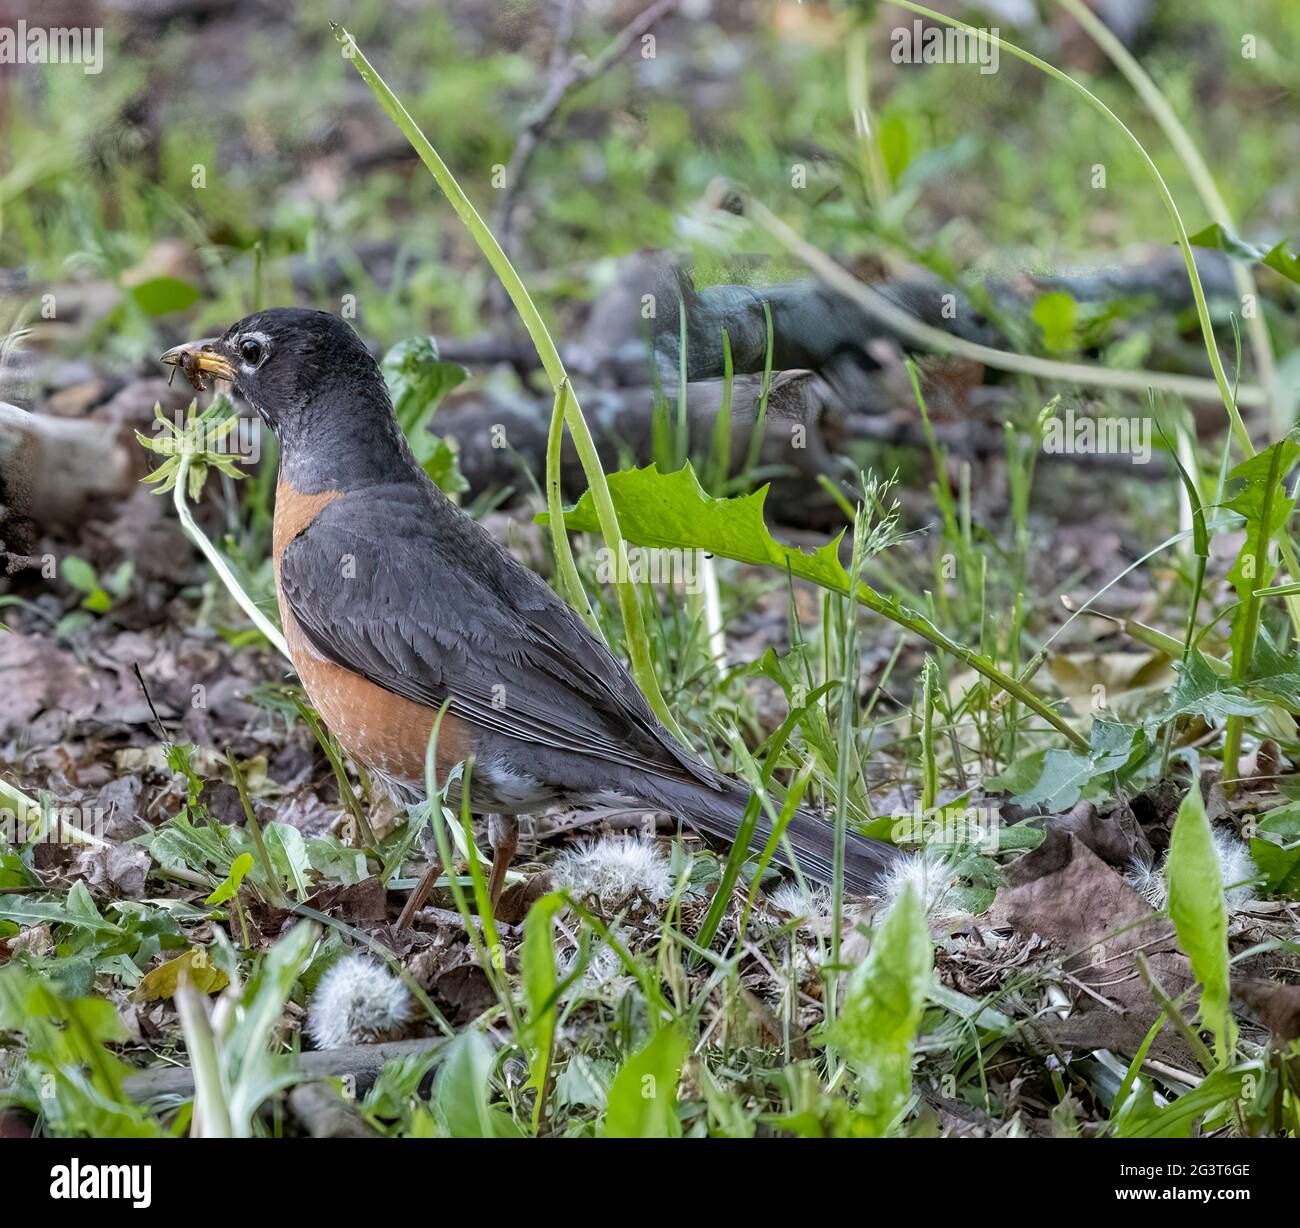 Red Breasted American Robin ( Turdus migratorius) On Ground With Worm In Beak Stock Photo